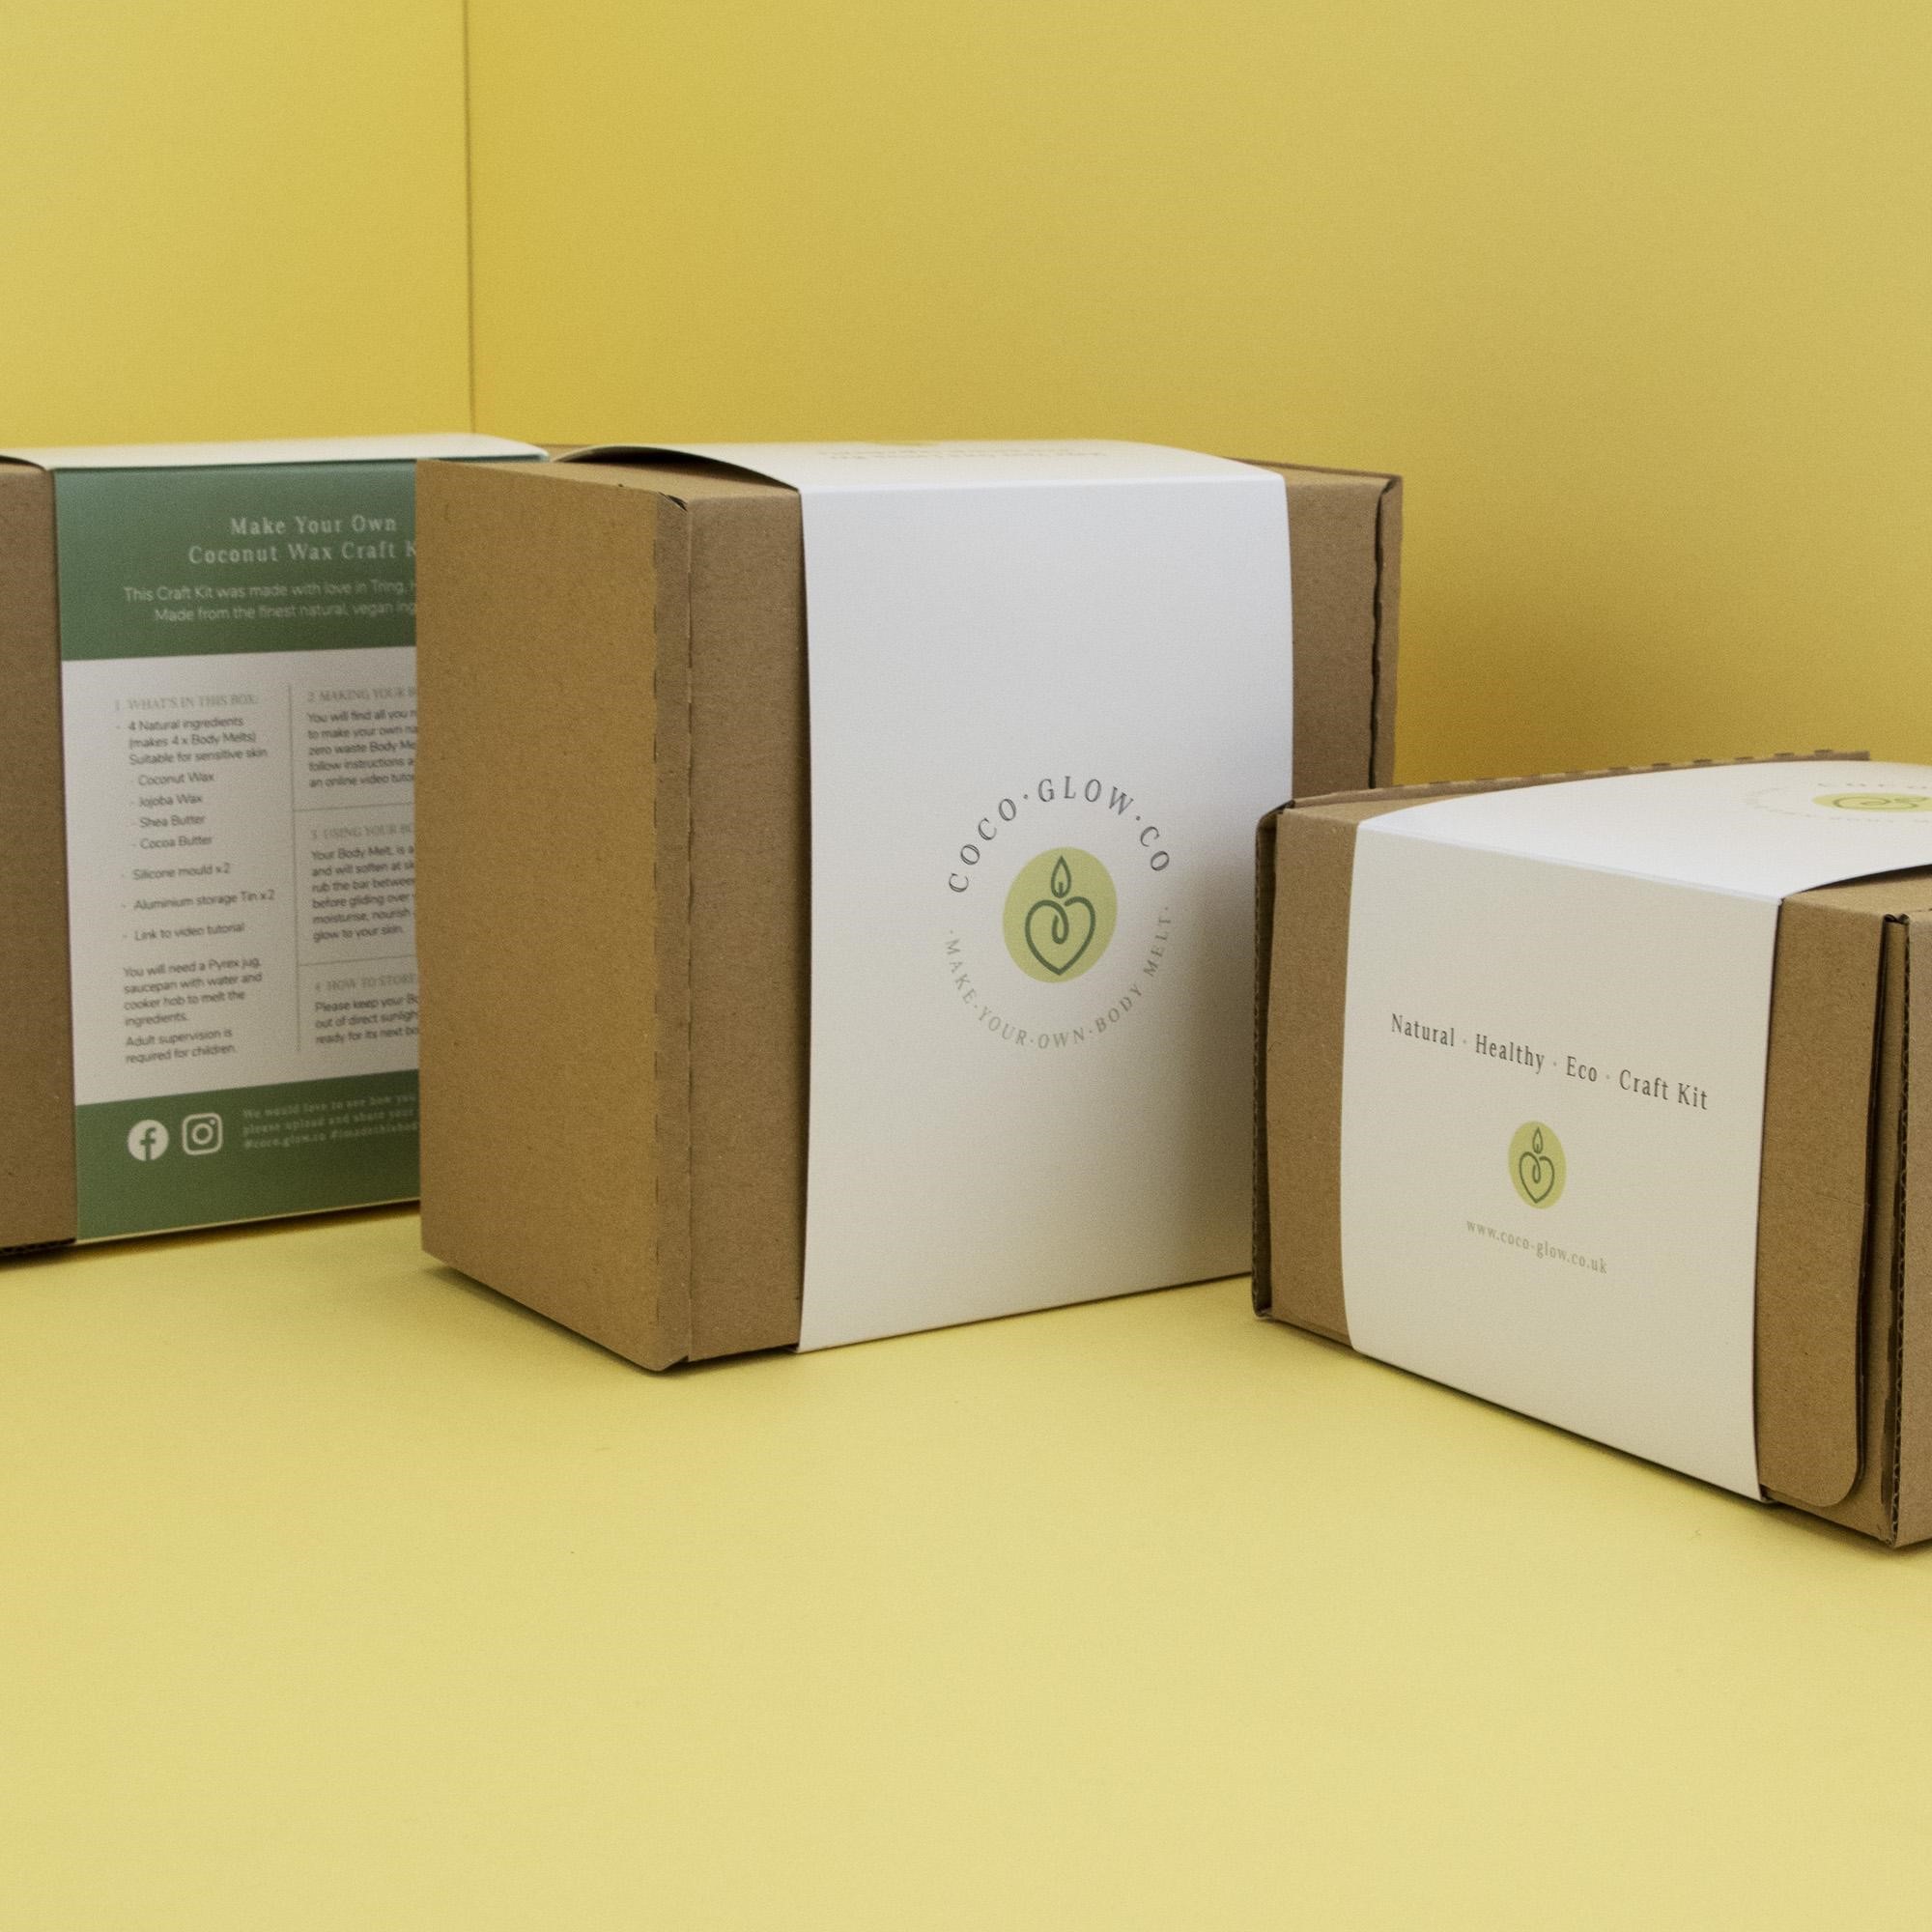 Paper and cardboard packaging is versatile, effective and eco-friendly.